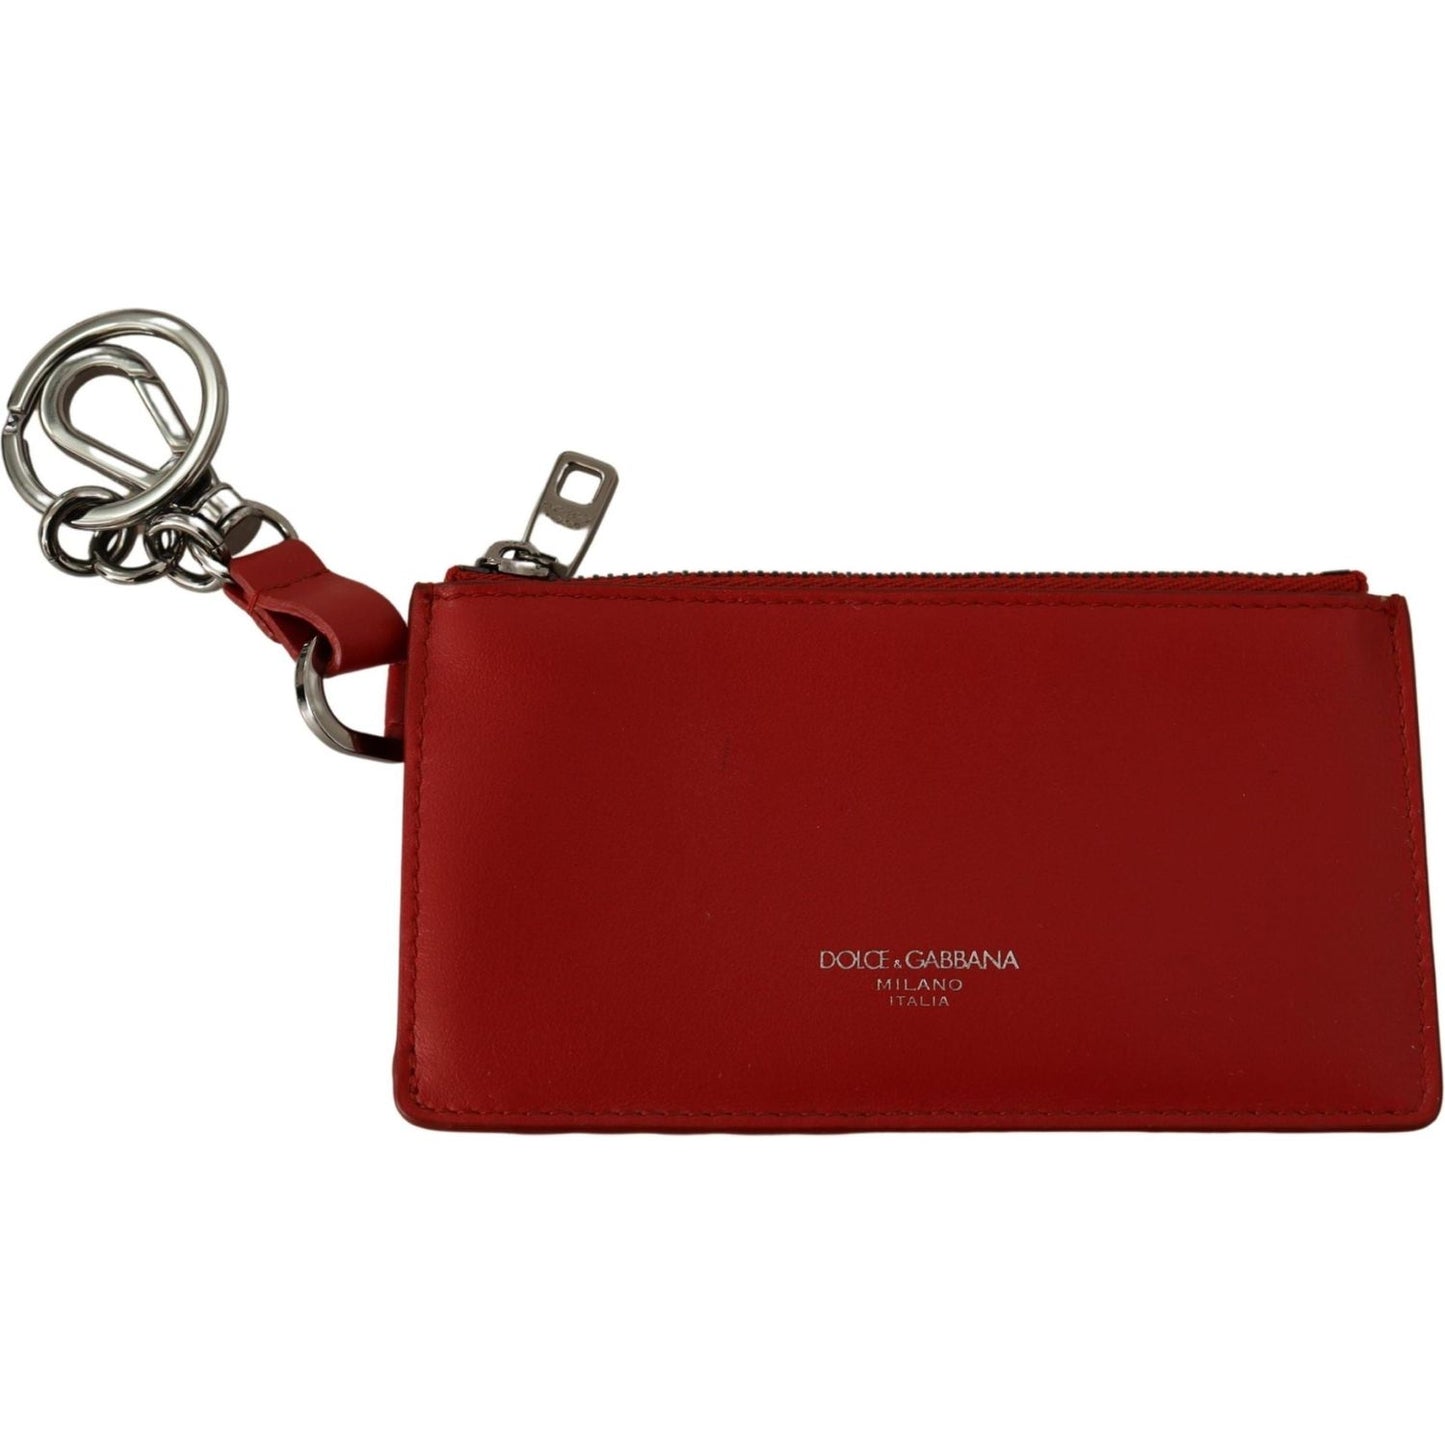 Dolce & Gabbana Elegant Leather Keychain in Vibrant Red red-leather-purse-silver-tone-keychain IMG_7587-scaled-f199c184-6c7.jpg